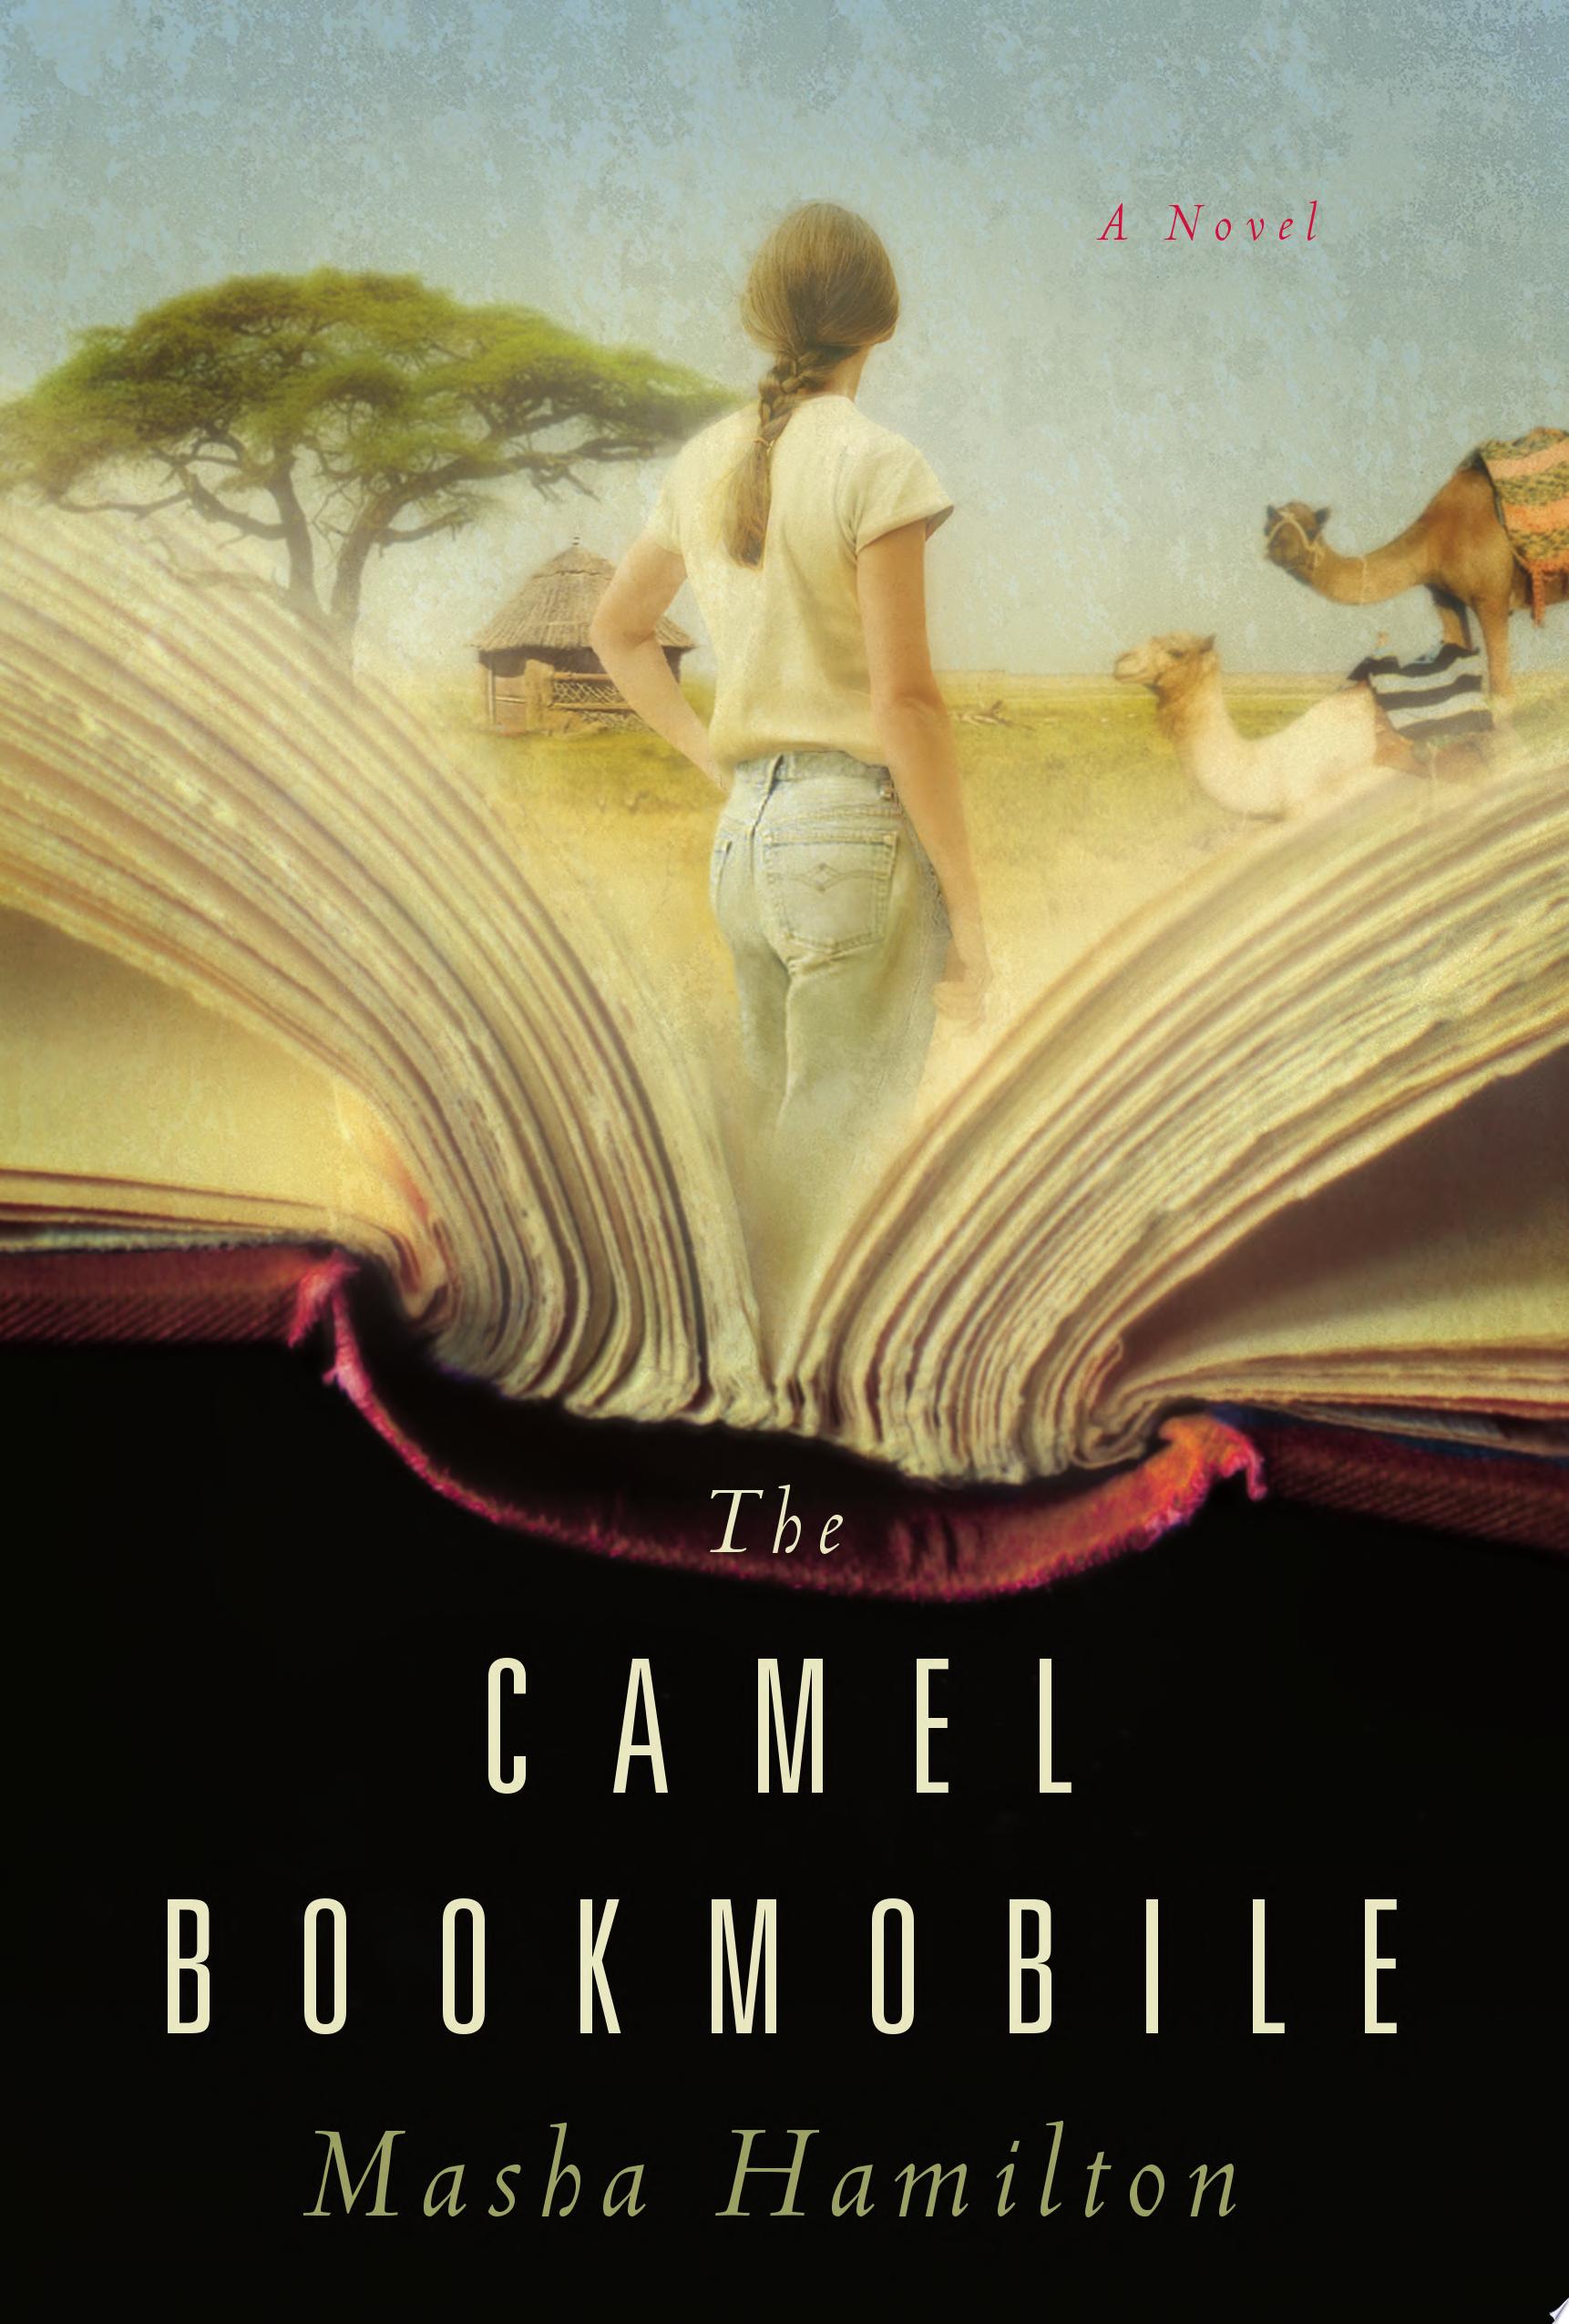 Image for "The Camel Bookmobile"